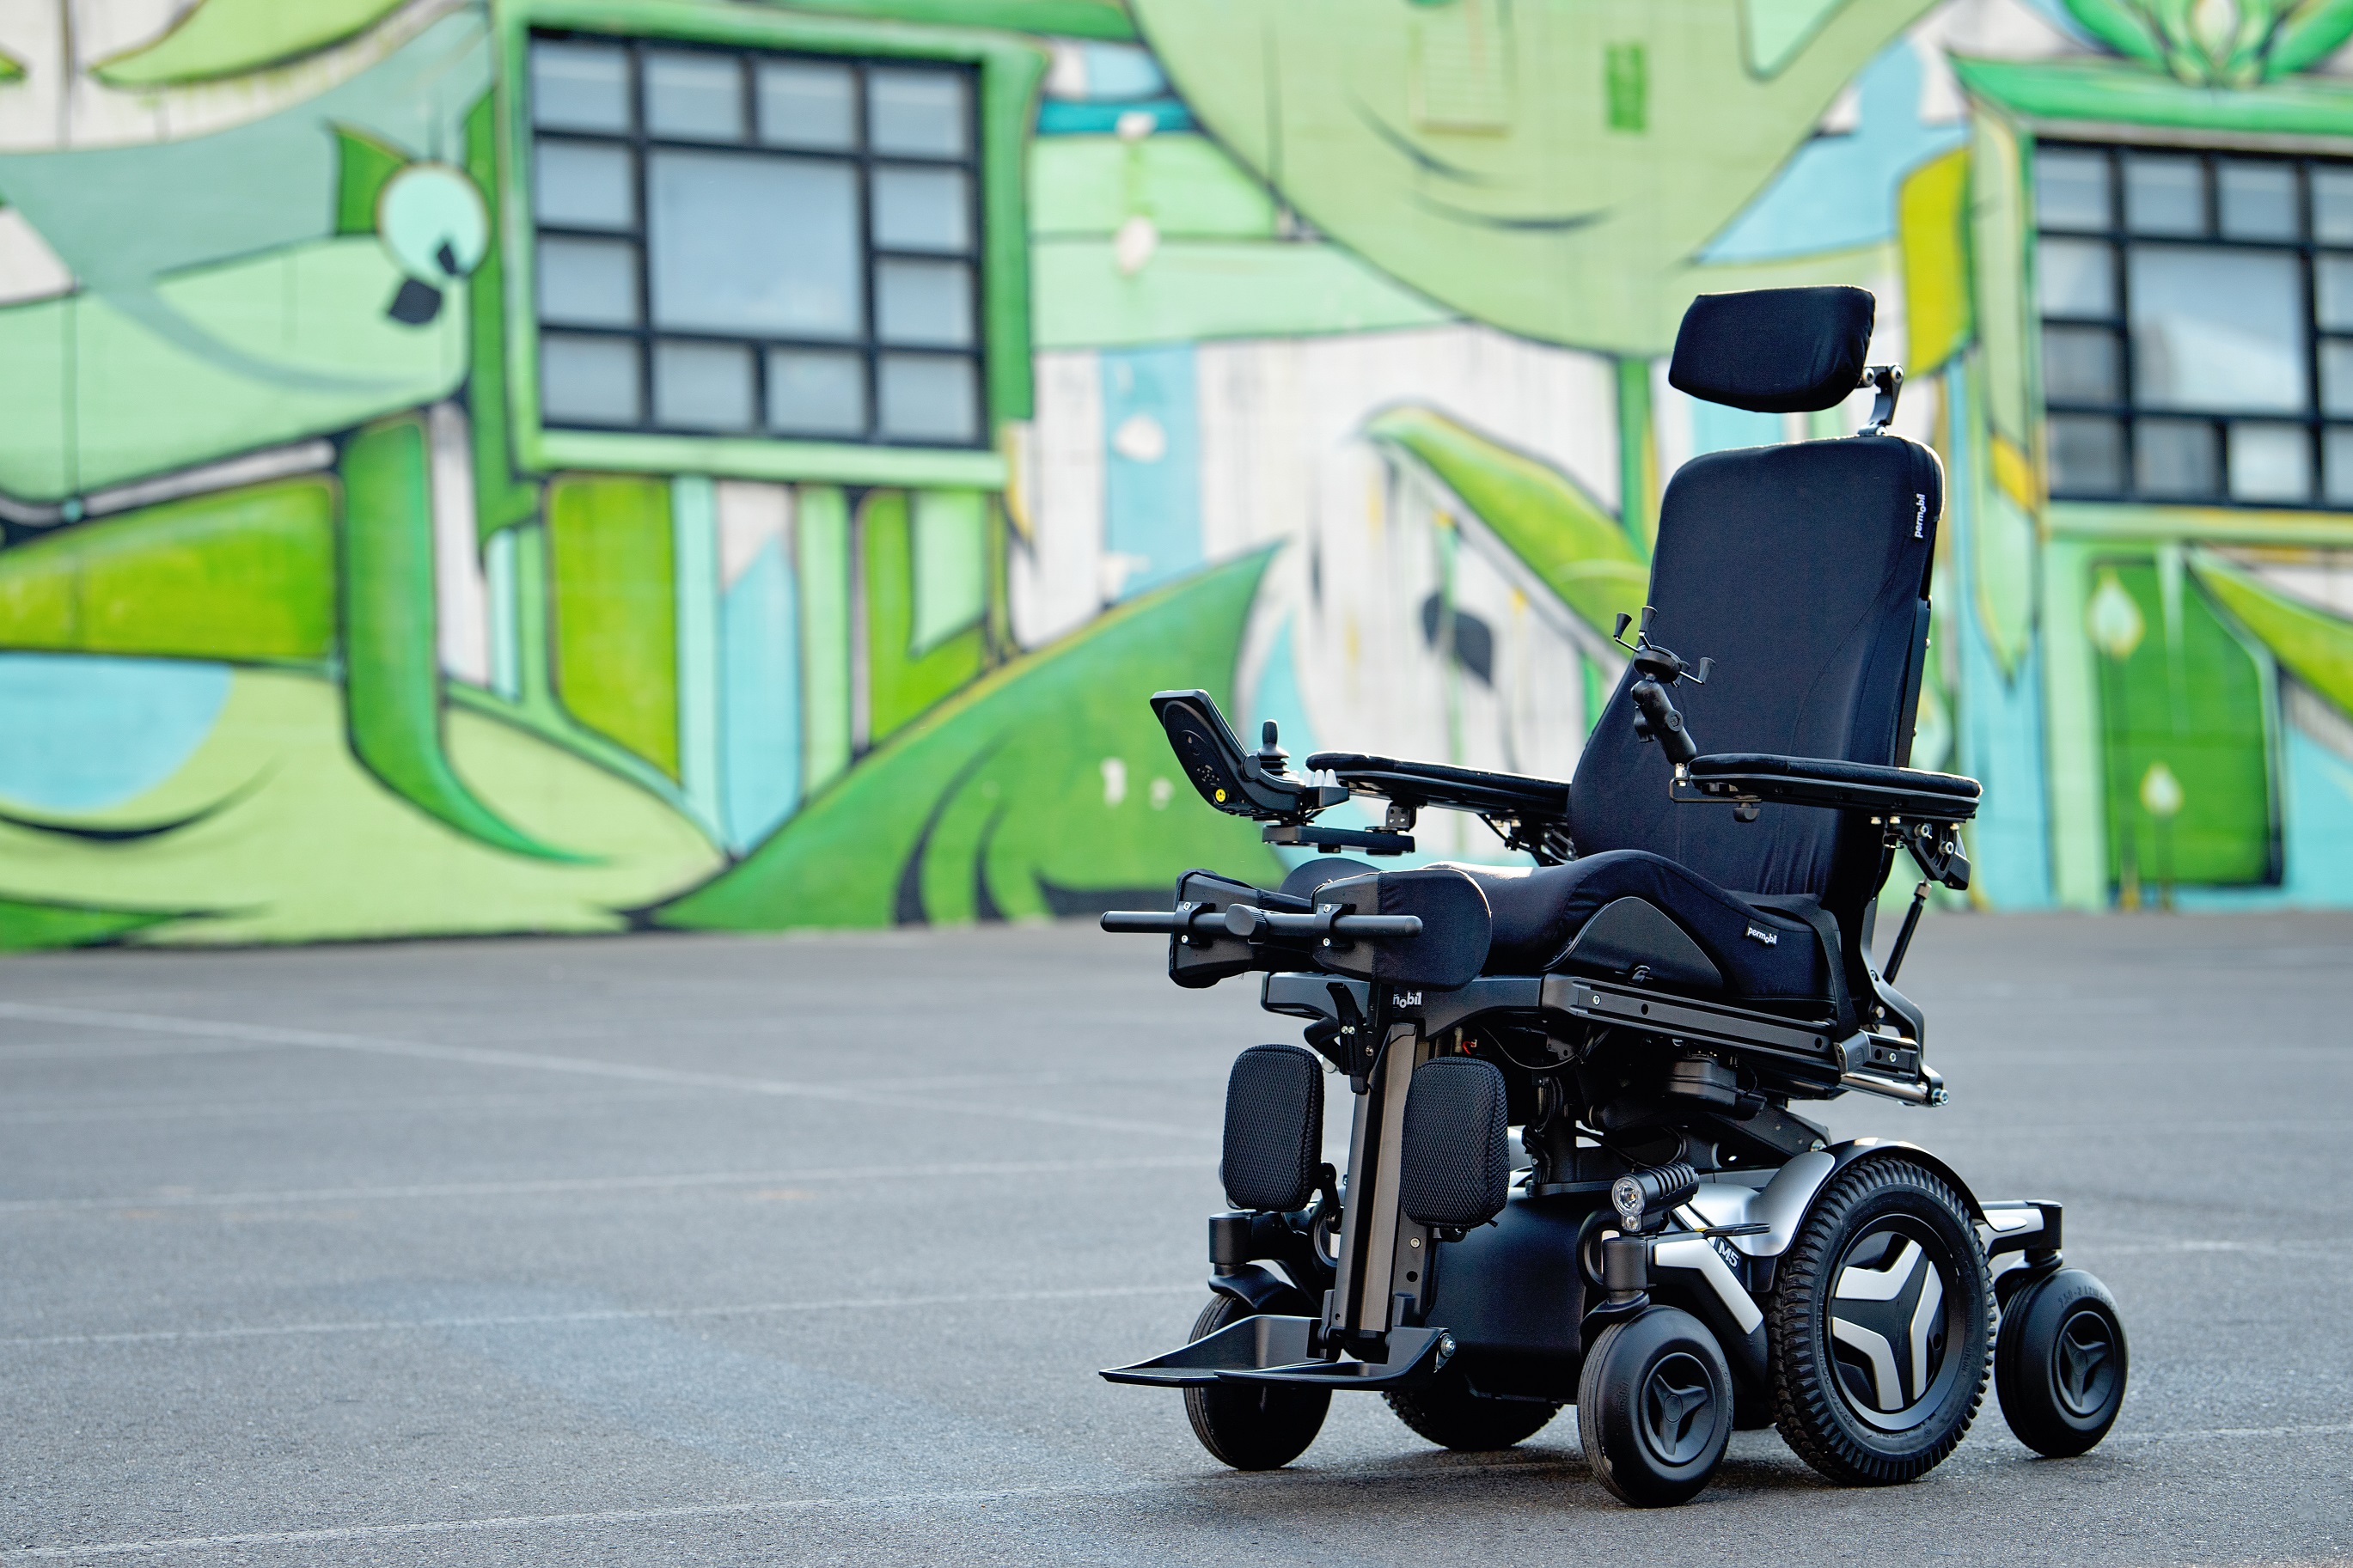 The Corpus M5 power chair with white accents, rehab seating and multiple user controls. It sits in front of a warehouse painted with urban artwork.